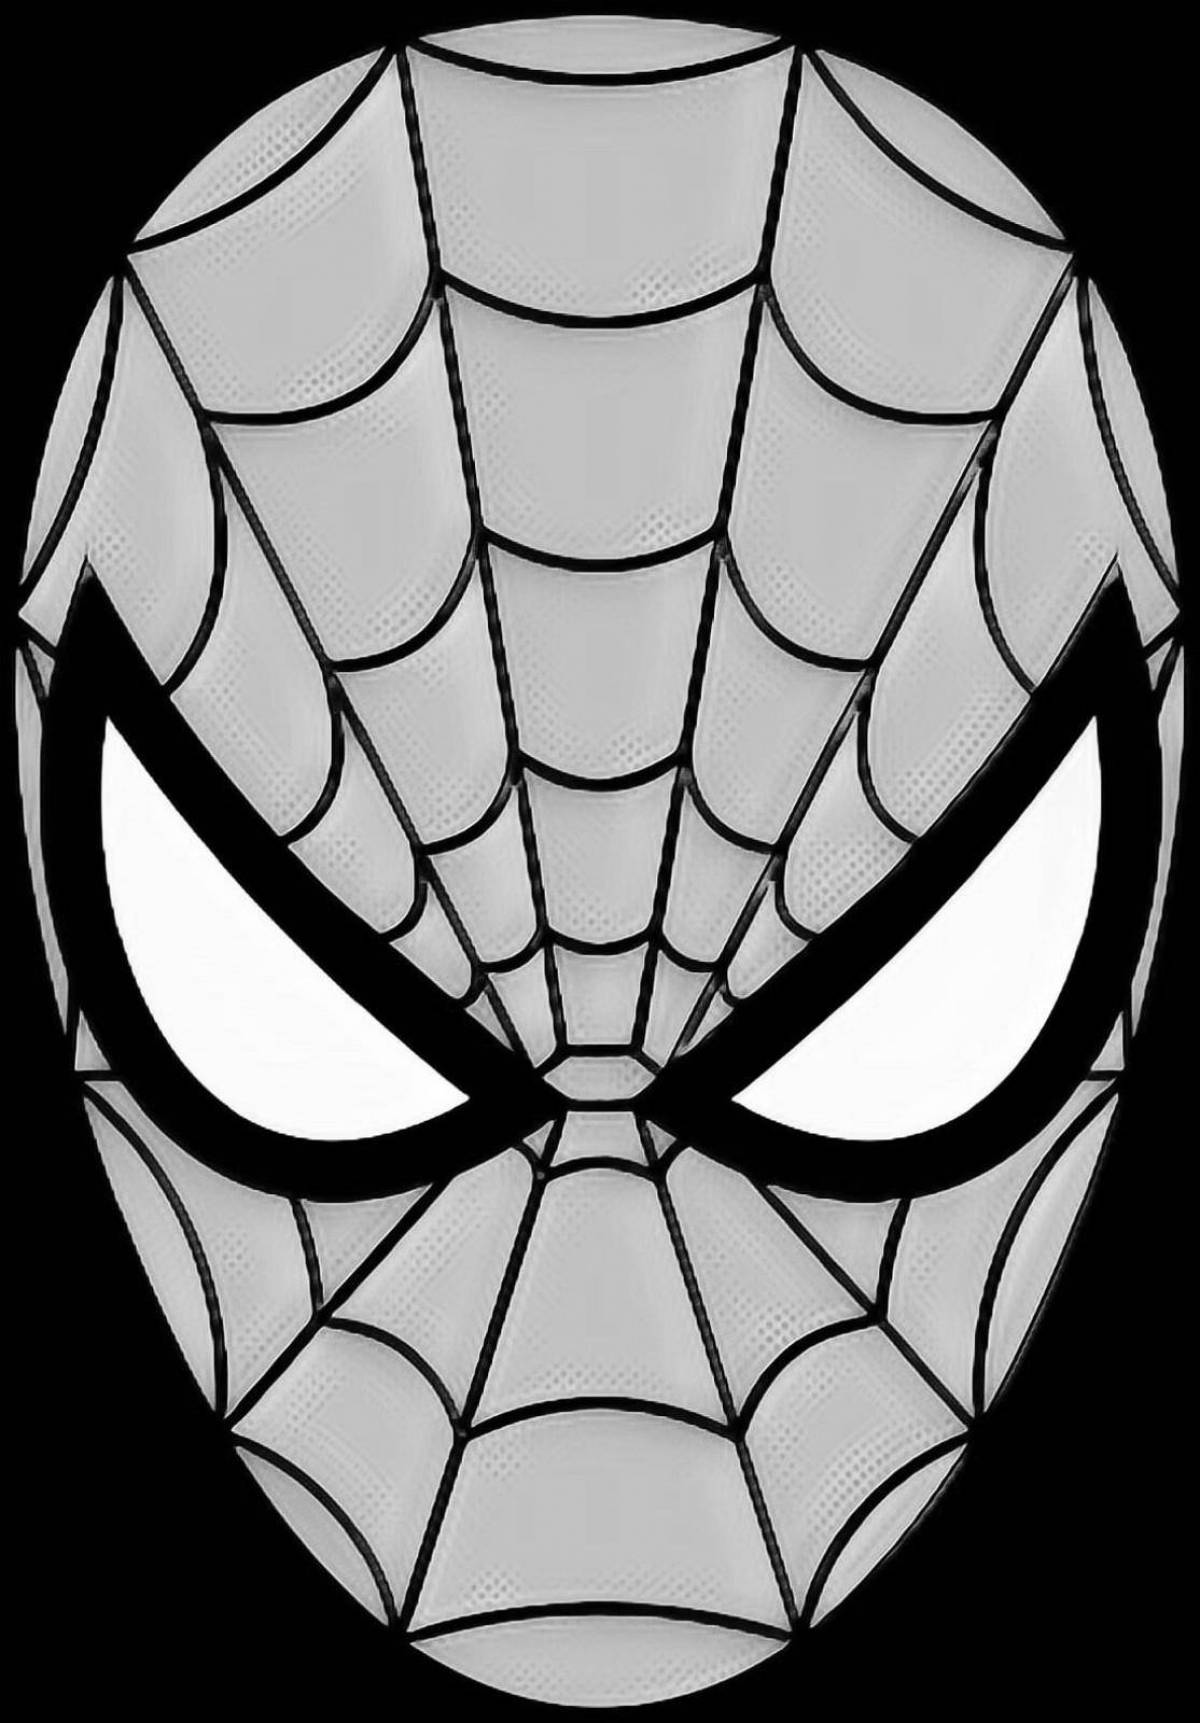 Spider-Man Vibrant Mask Coloring Page